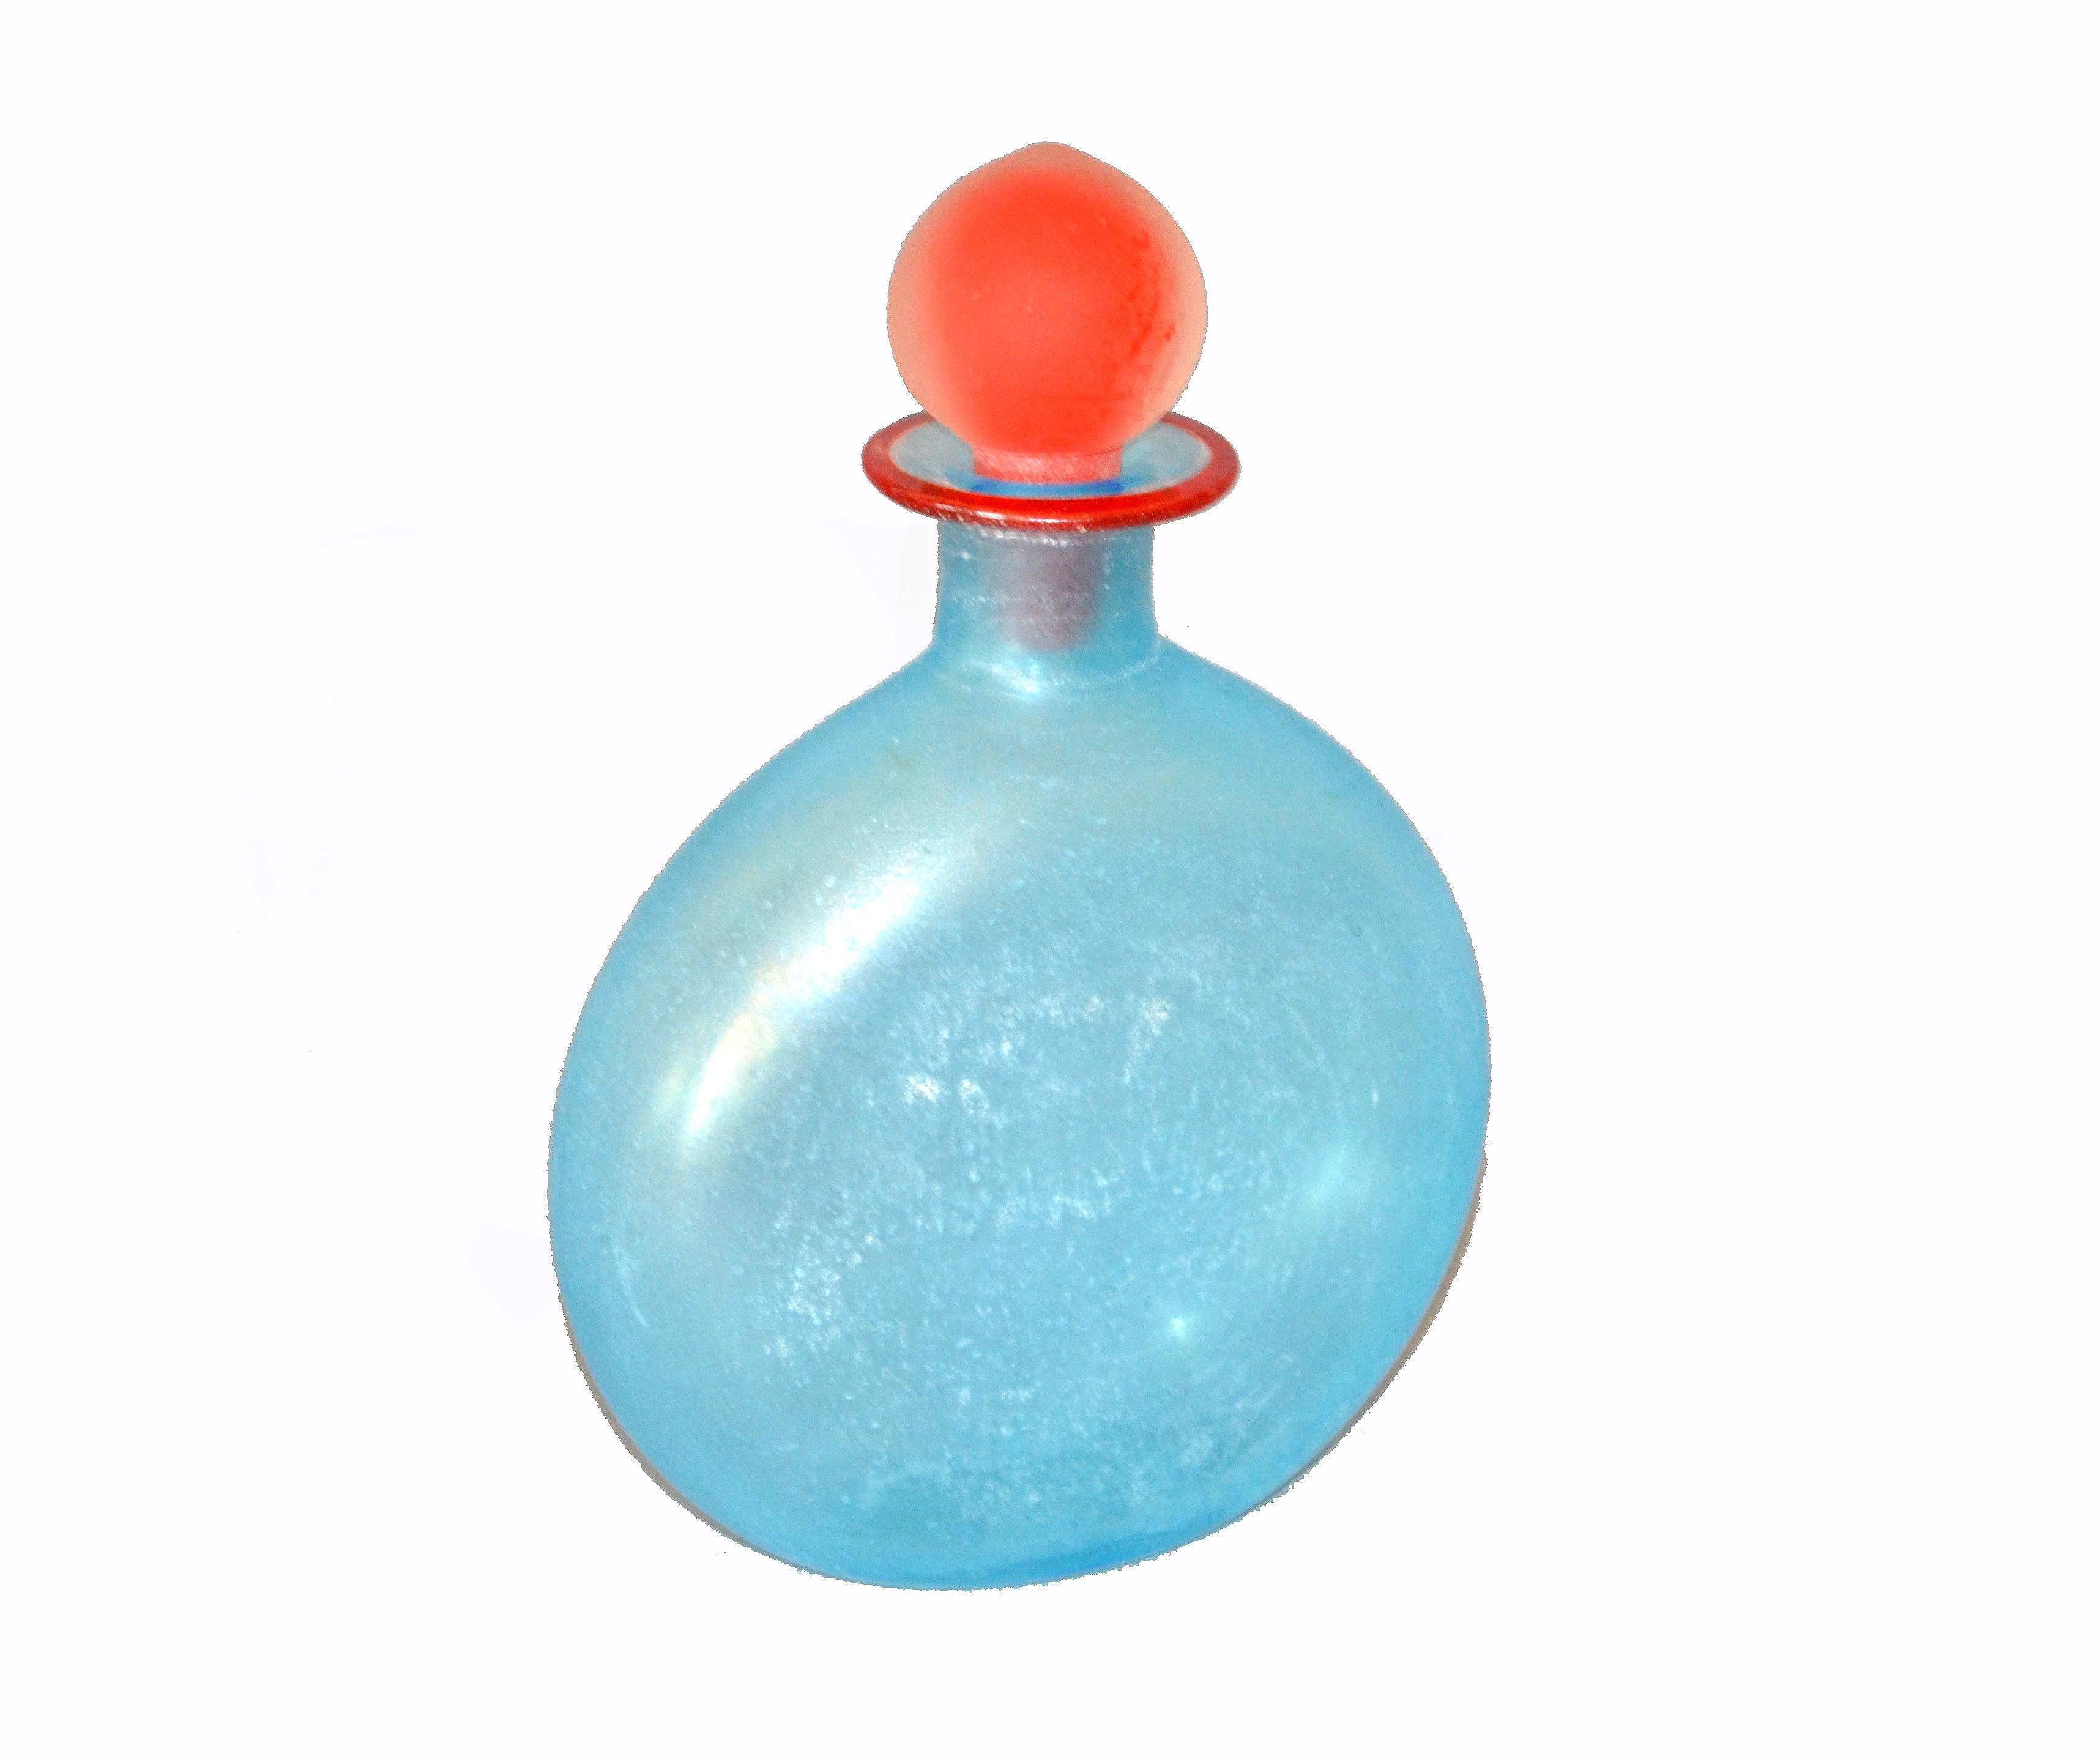 Venetian blue Murano art glass decanter, vessel with red stopper, Italy.
This elegant aqua blue hand blown bottle has a loose-fitting red stopper and polished pontil. This decanter is in superb condition with no chips, cracks or restoration.